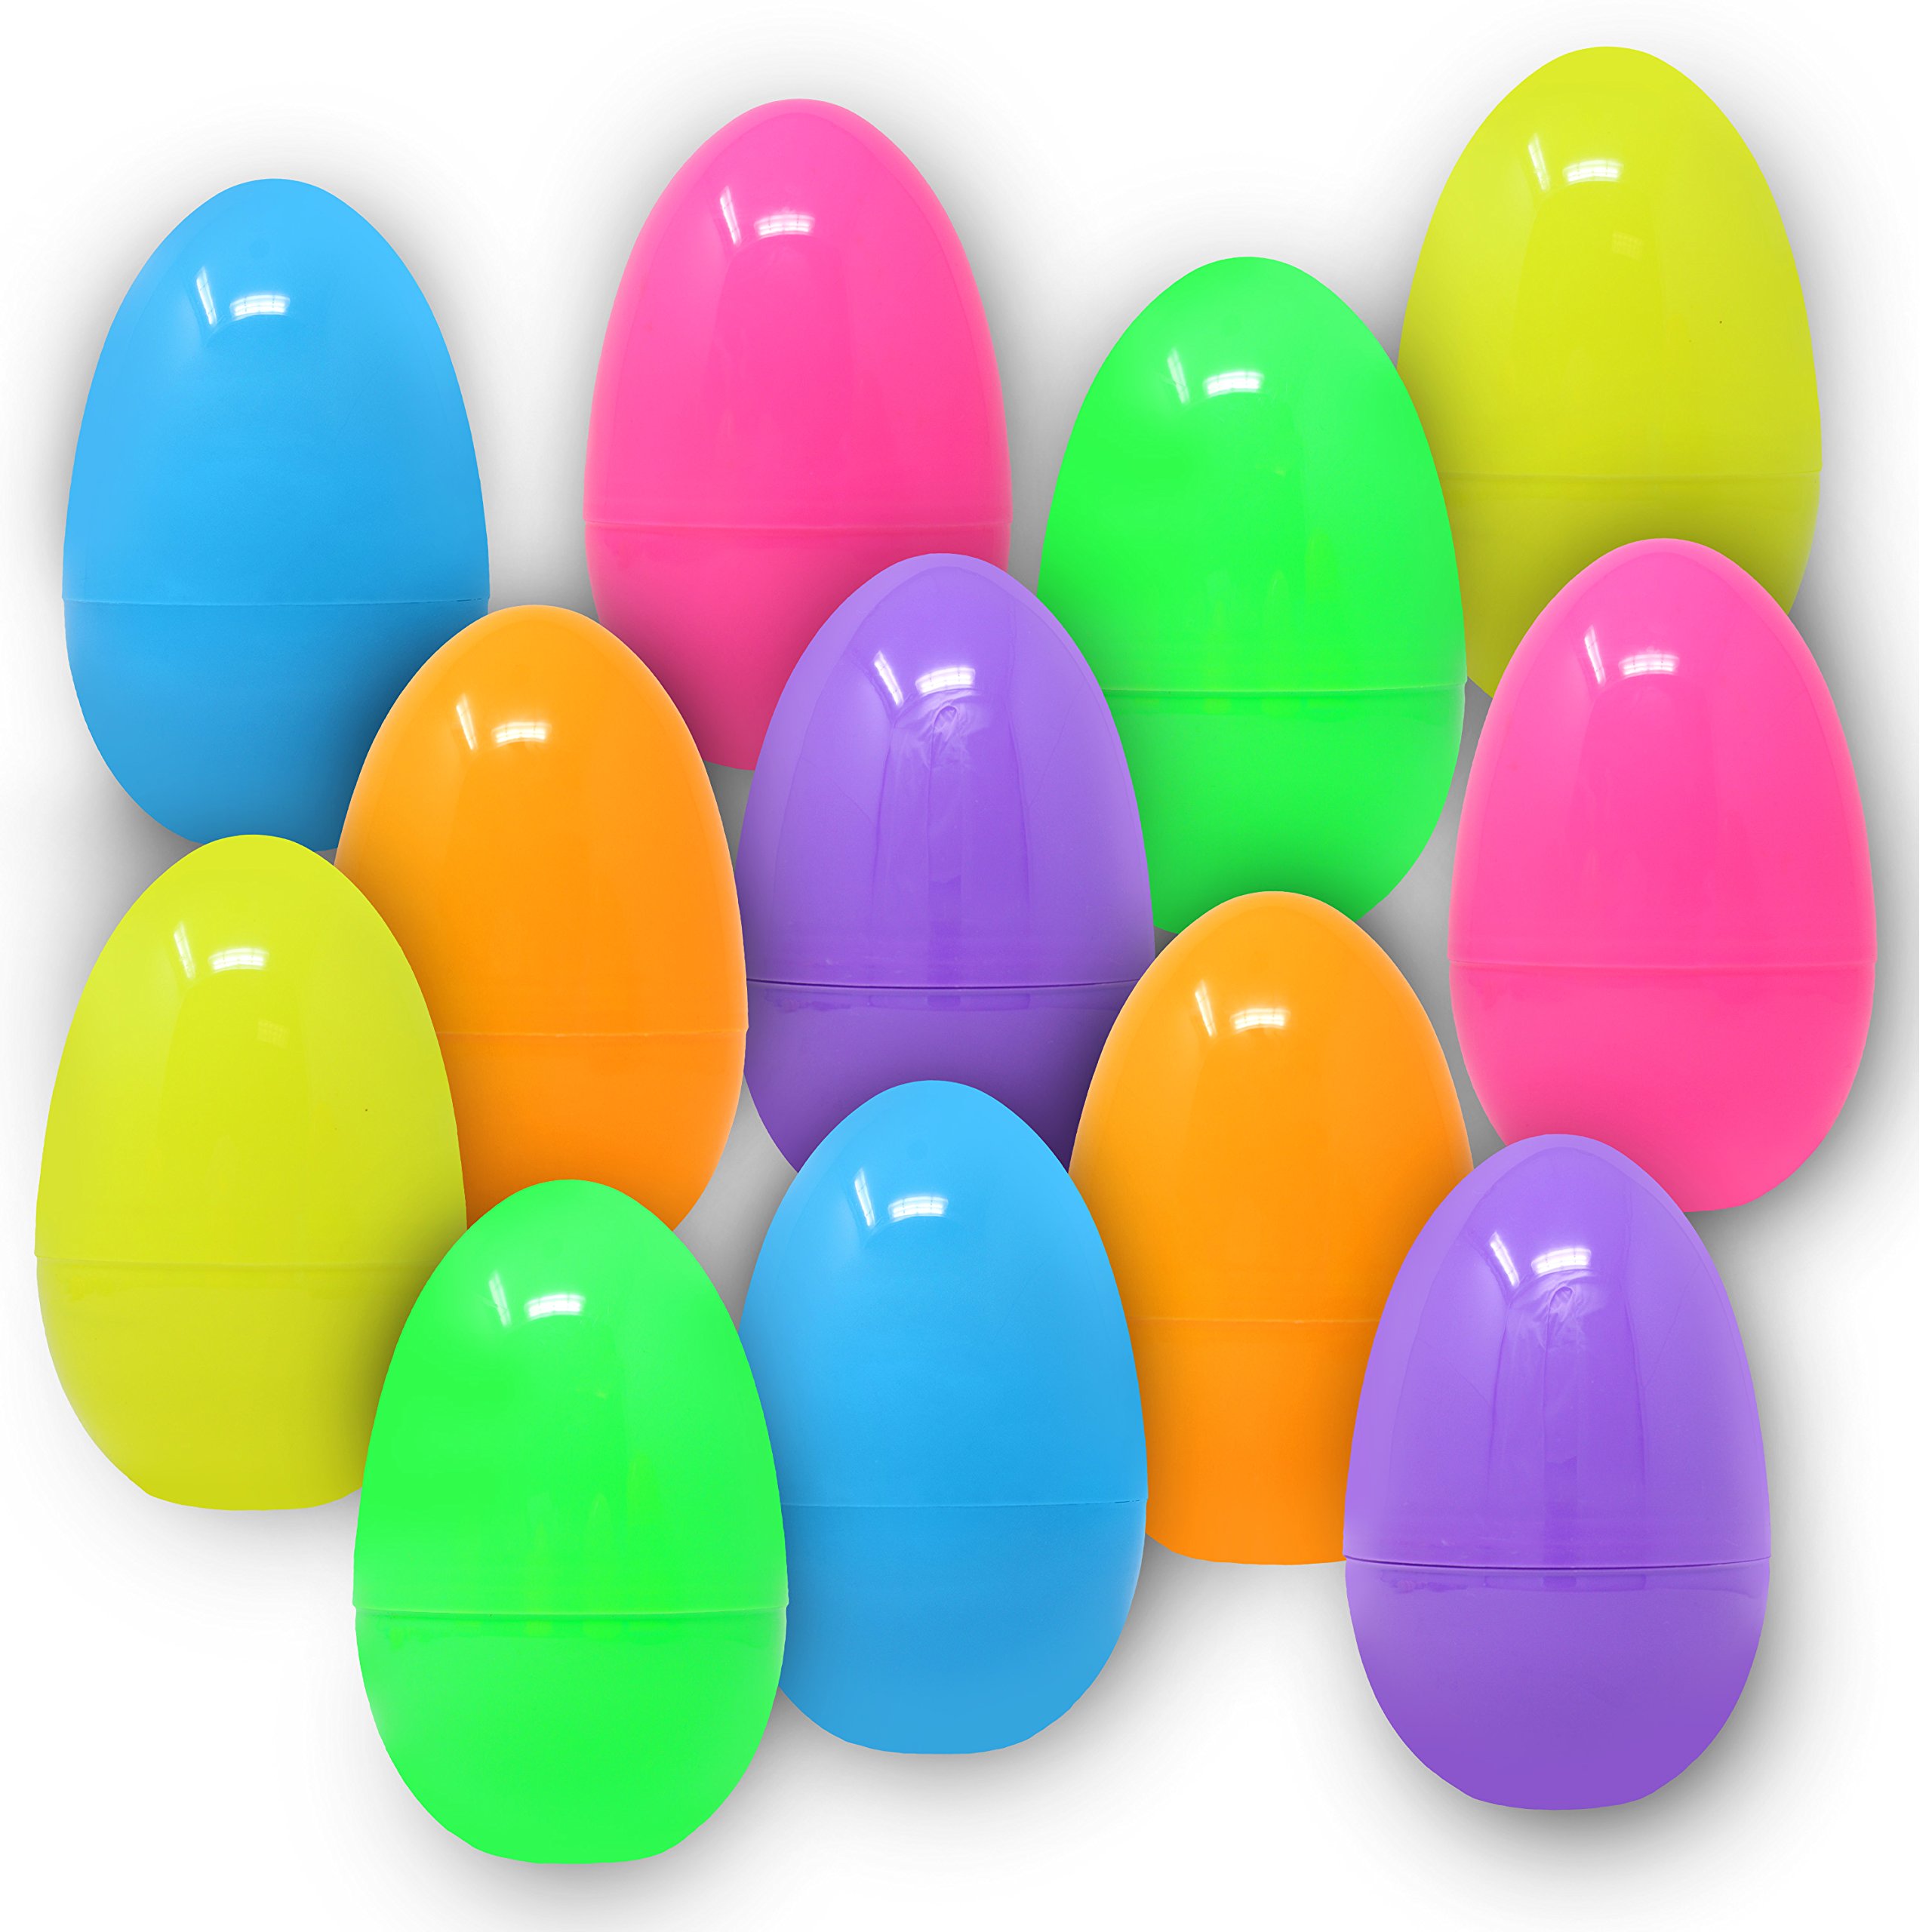 JOYIN 12 Pieces 7" Jumbo Plastic Bright Solid Easter Eggs Assorted Colors for Filling Treats, Easter Theme Party Favor, Easter Eggs Hunt, Basket Stuffers Fillers, Classroom Prize Supplies Toy - image 4 of 6